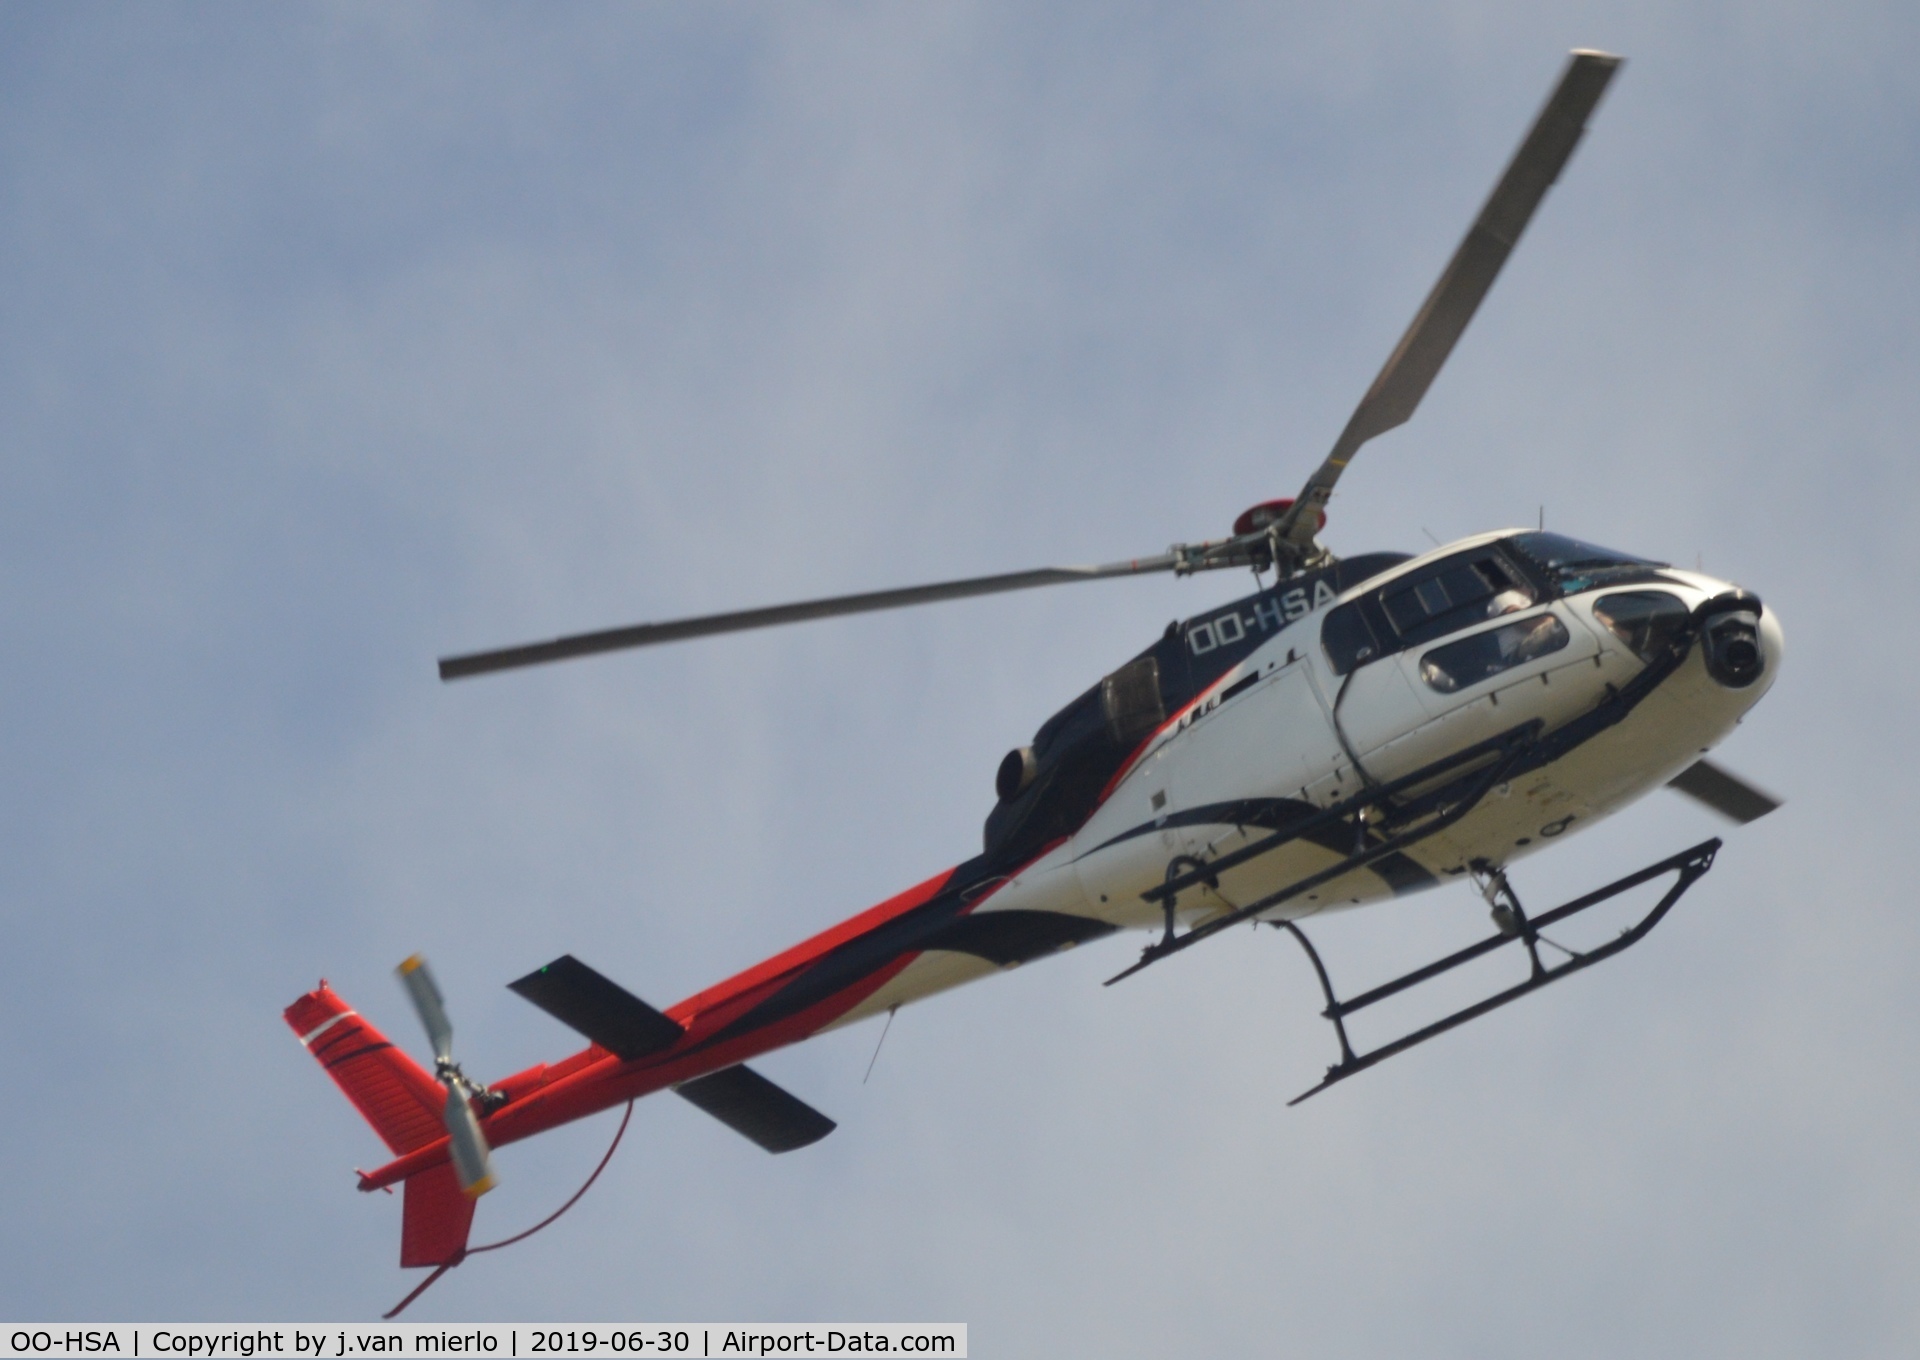 OO-HSA, Eurocopter AS-355N C/N 5720, Over Ghent, Belgium Tv coverage of a bicycle race